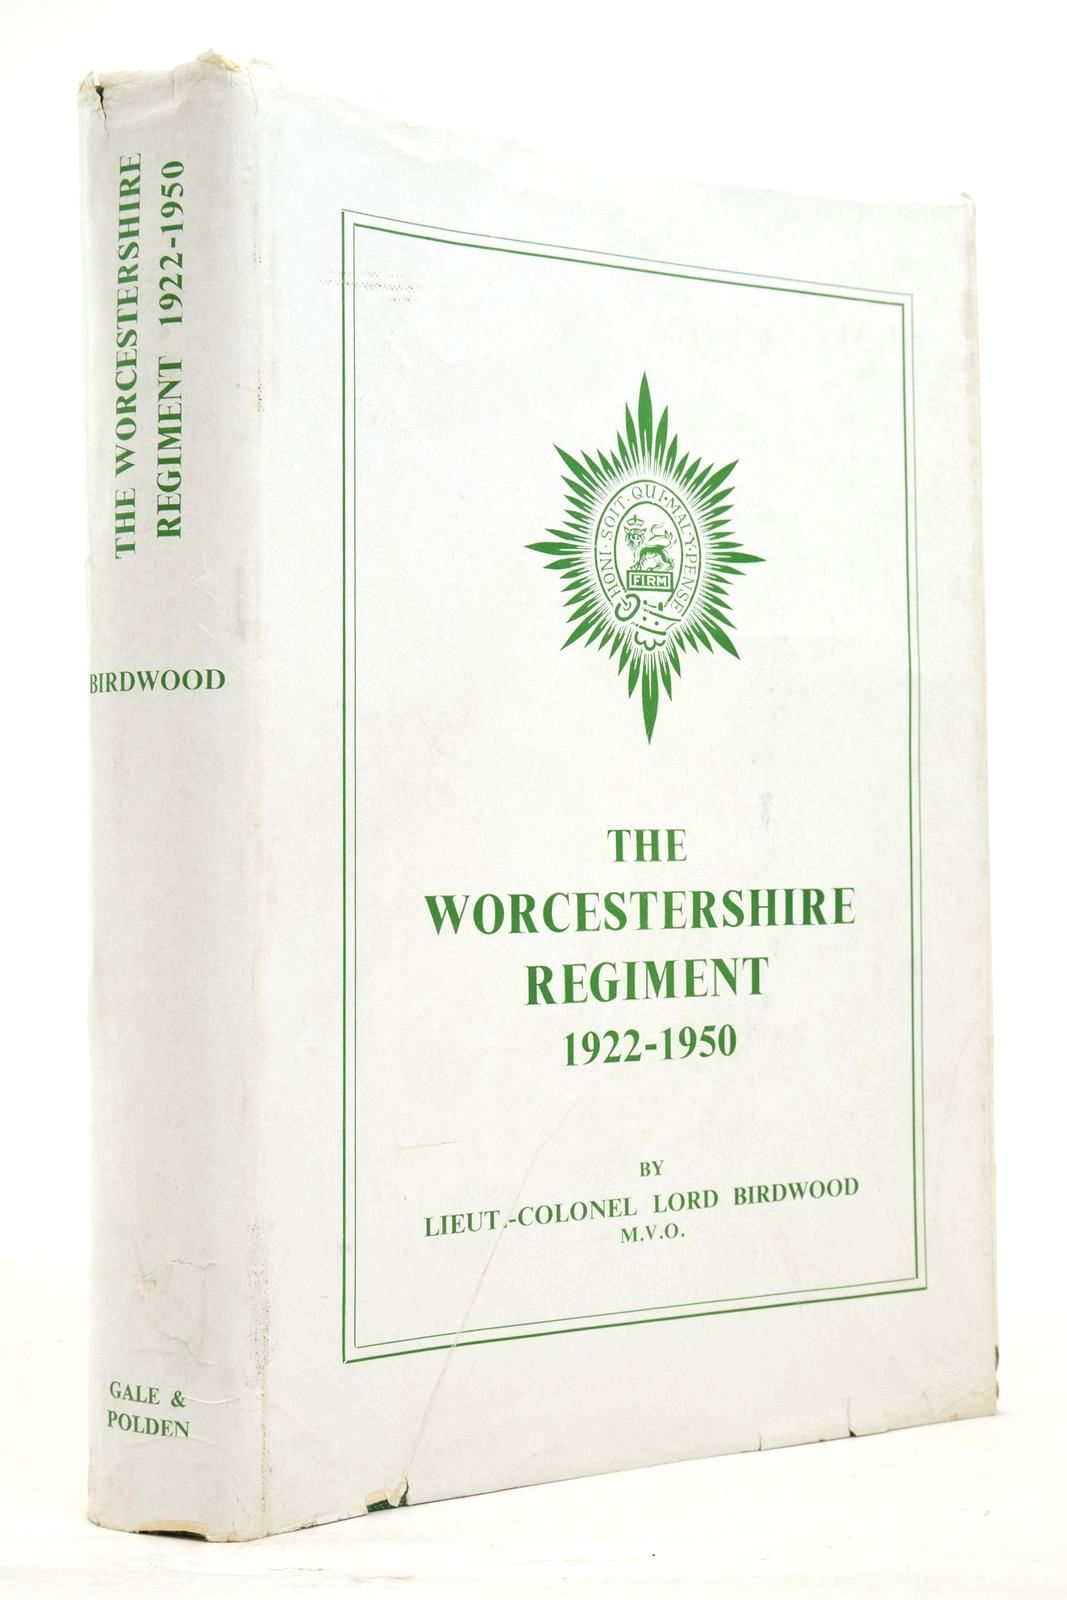 Photo of THE WORCESTERSHIRE REGIMENT 1922-1950 written by Birdwood, C.B. published by Gale & Polden, Ltd. (STOCK CODE: 2137747)  for sale by Stella & Rose's Books